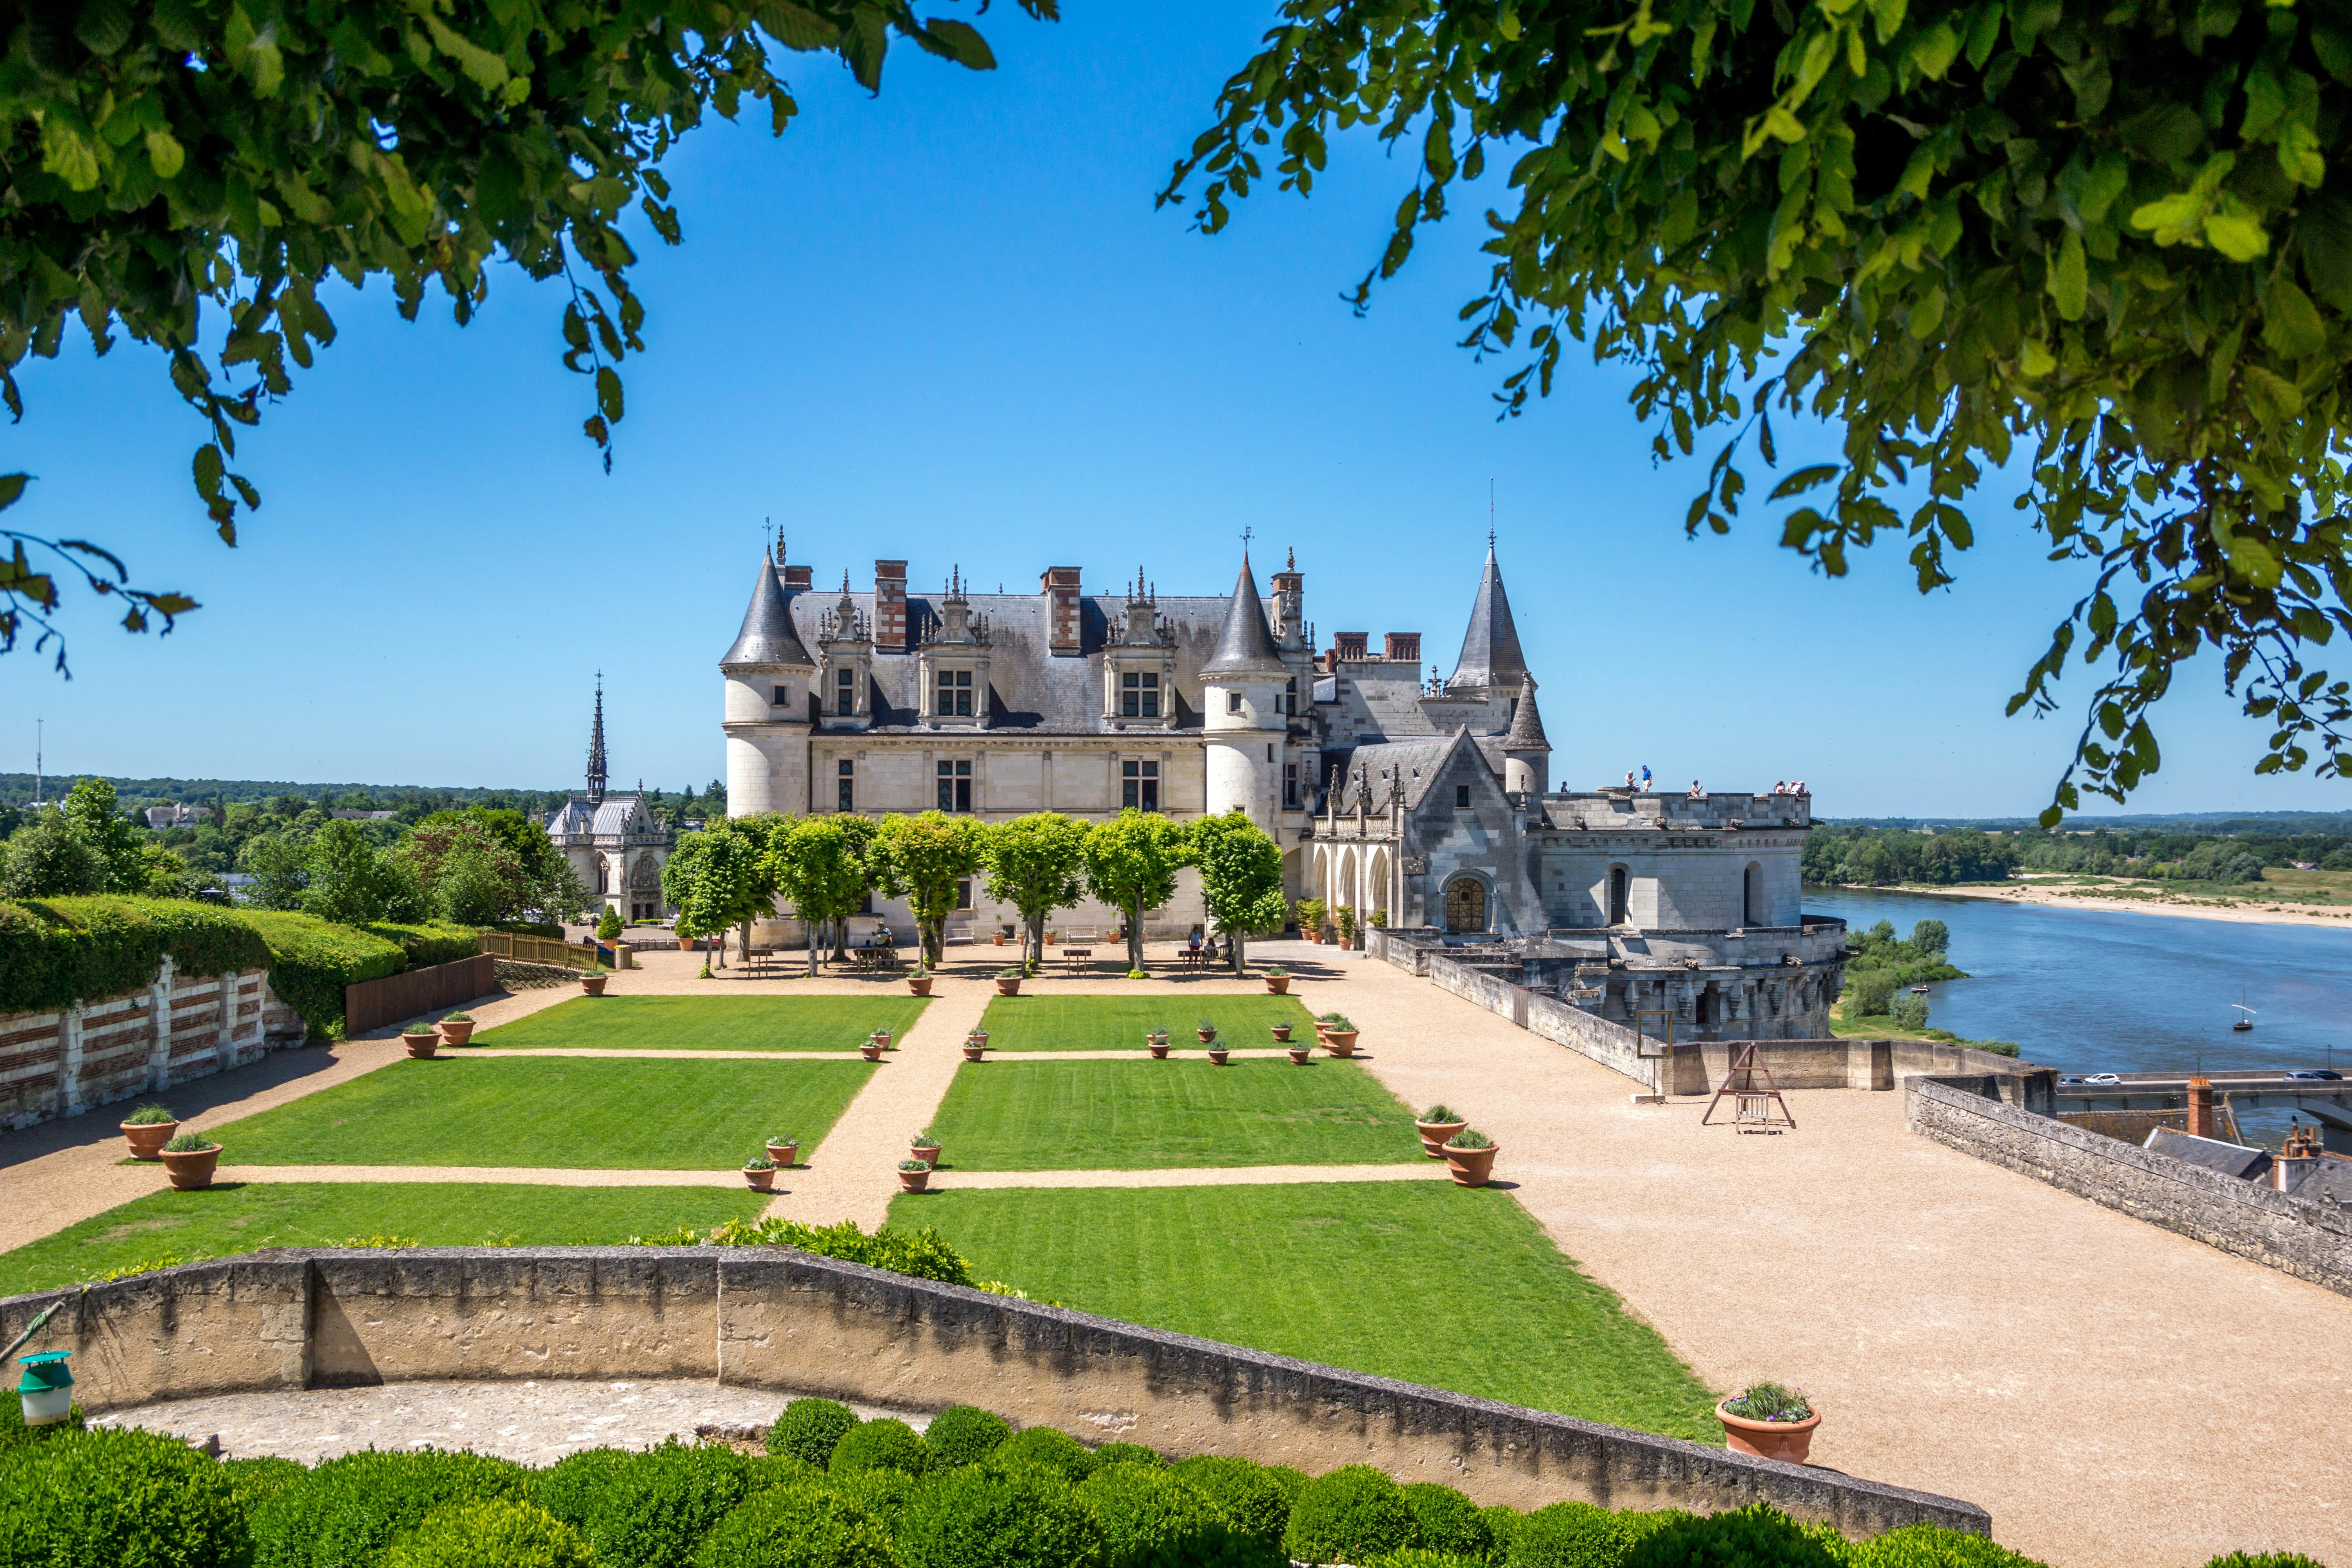 Skip-the-line tickets to the Château Royal d'Amboise